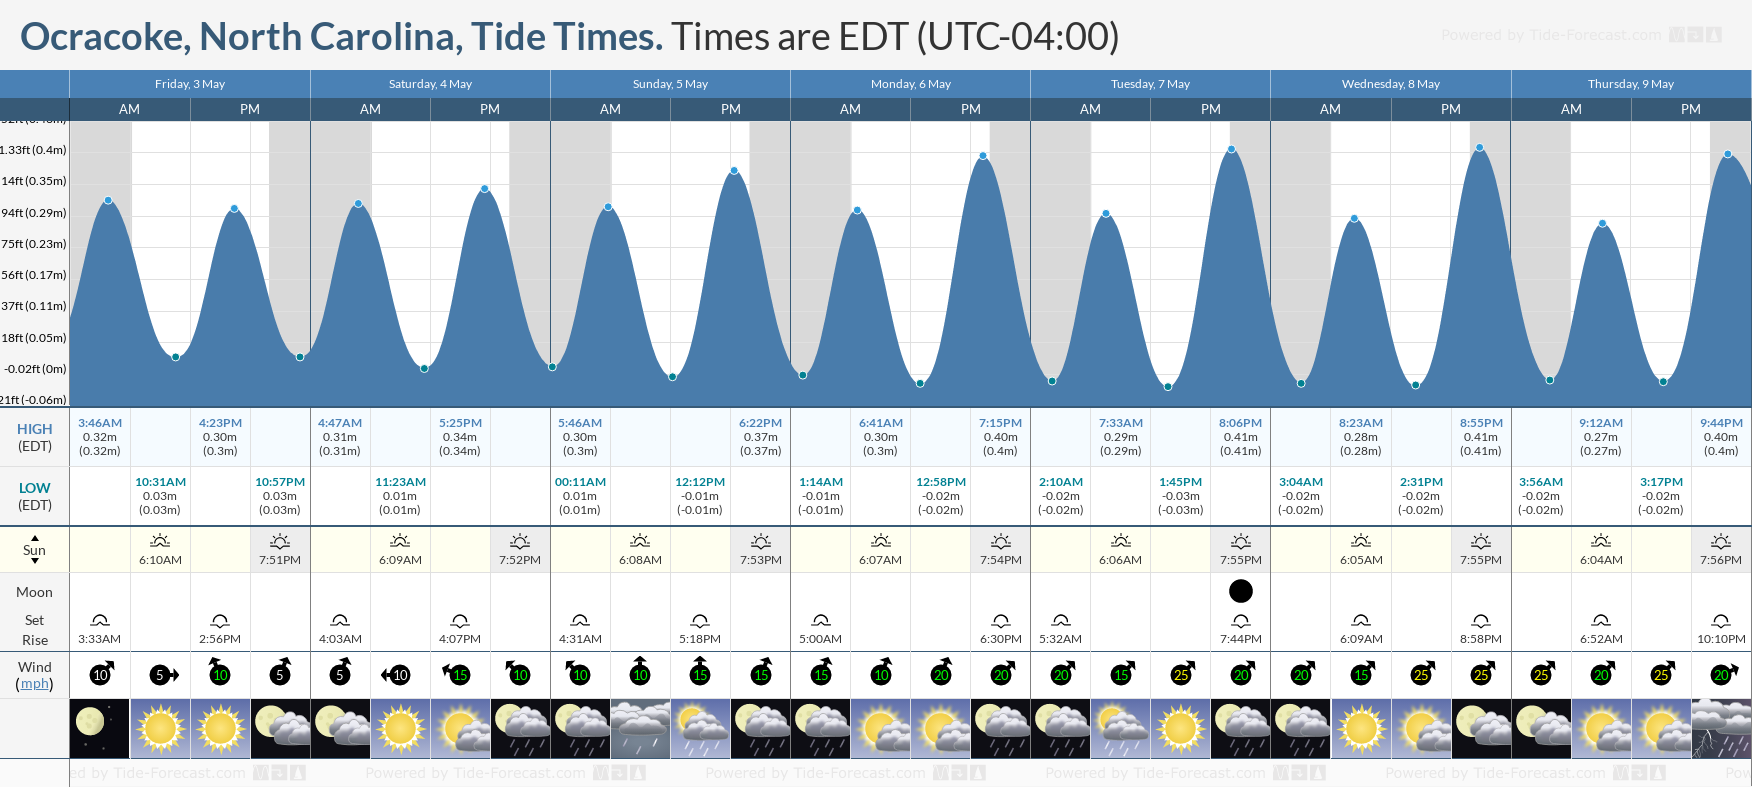 Ocracoke, North Carolina Tide Chart including high and low tide tide times for the next 7 days